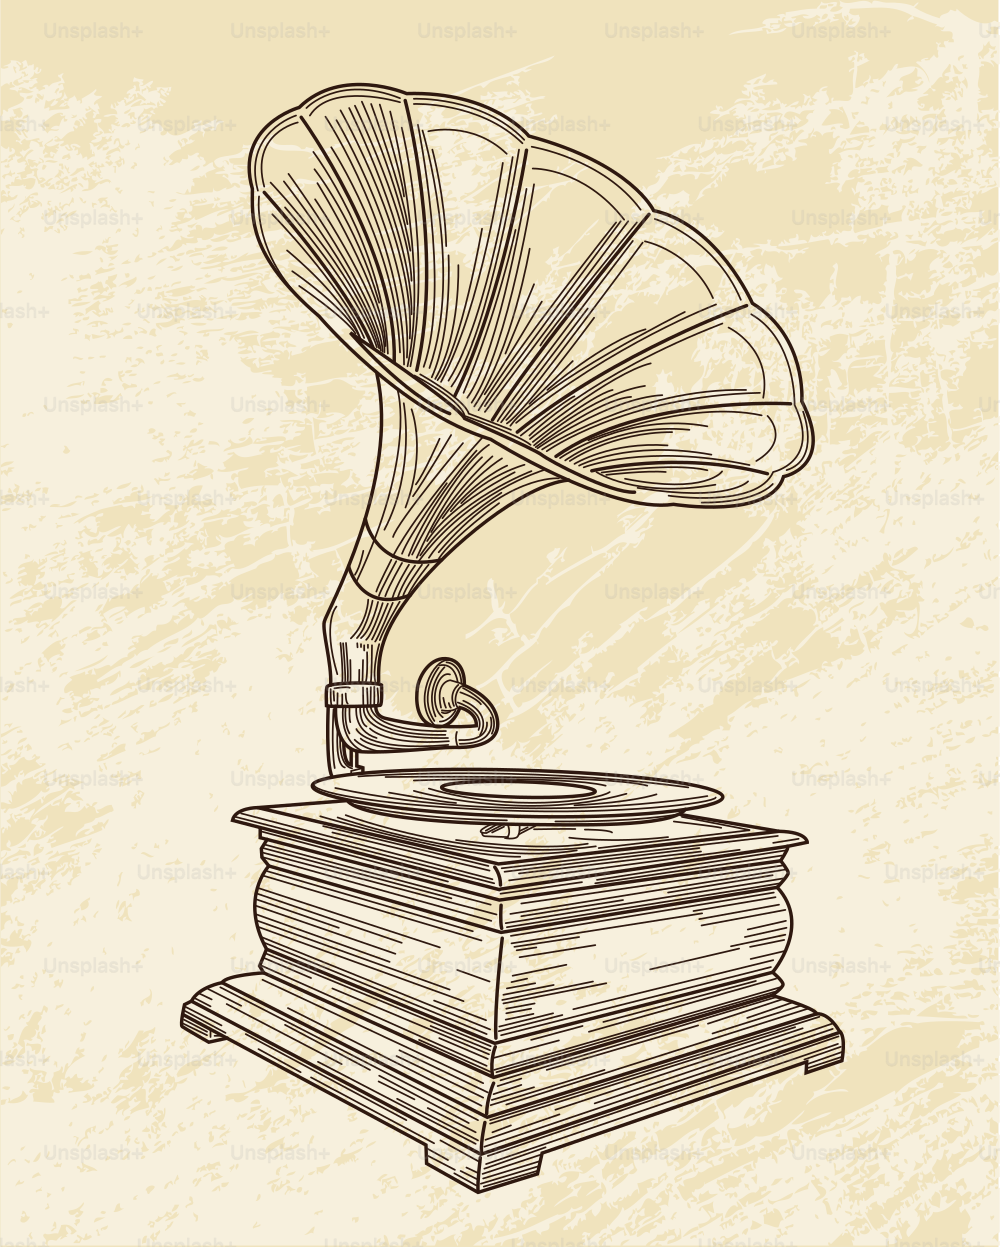 An antique gramophone on a rustic background.